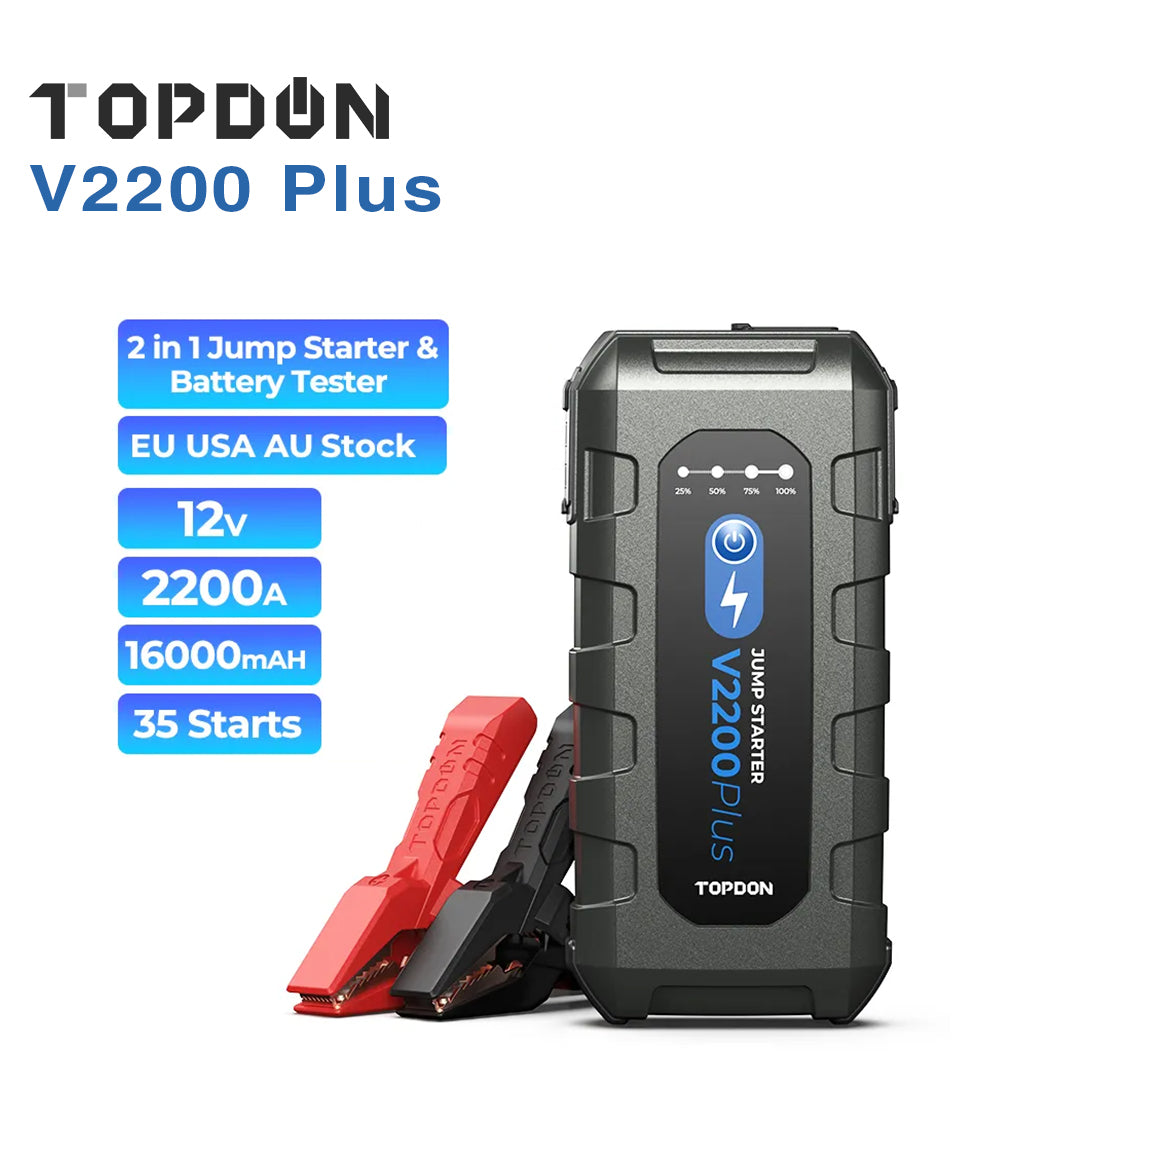 Topdon V2200 Plus Portable Jump Starter And Battery Tester And Analyzer Topdon